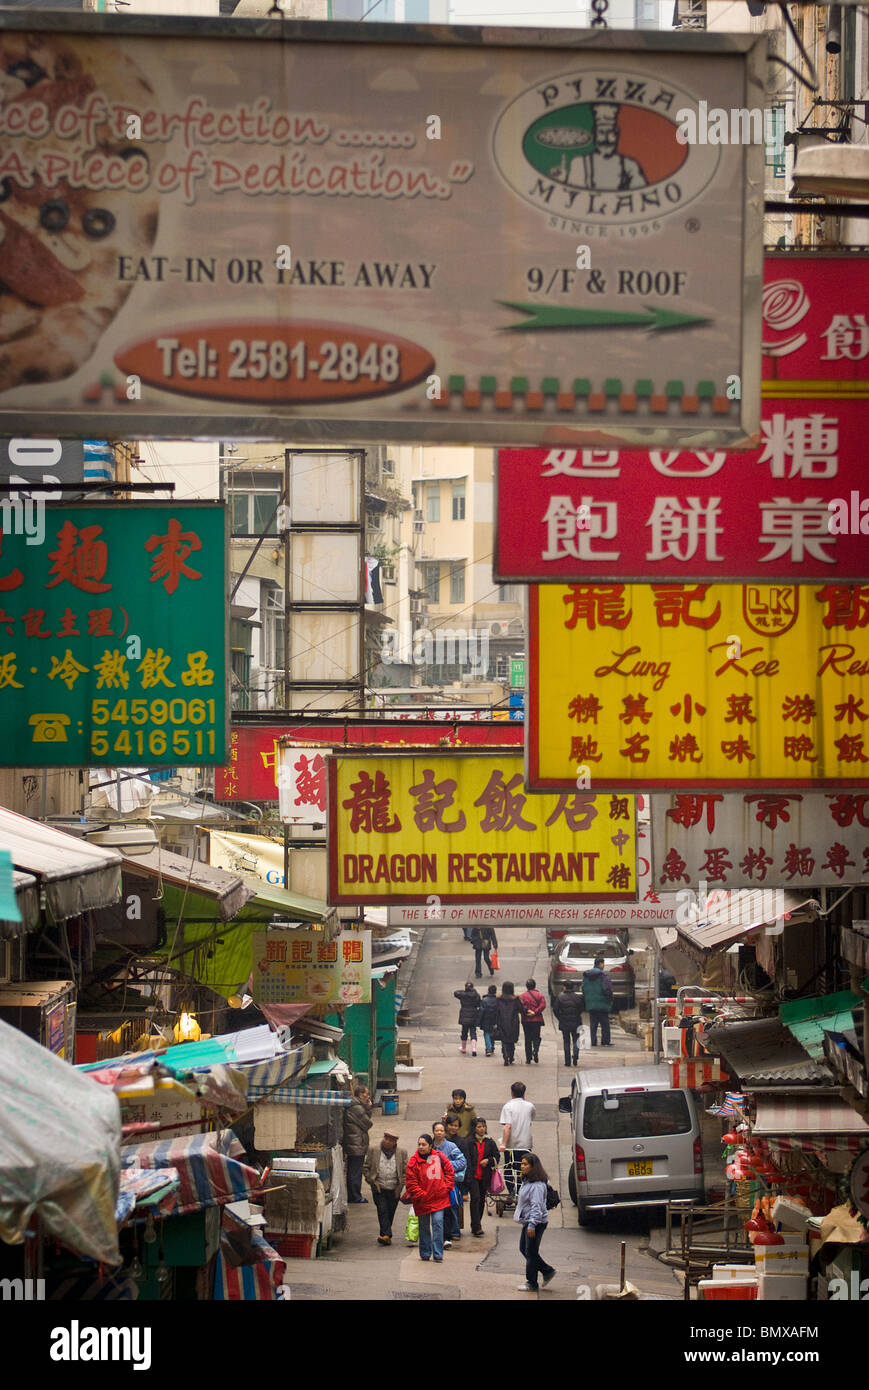 In the Hong Kong Central district there are many wet markets and shopping streets that typify the frenetic nature of the city. Stock Photo